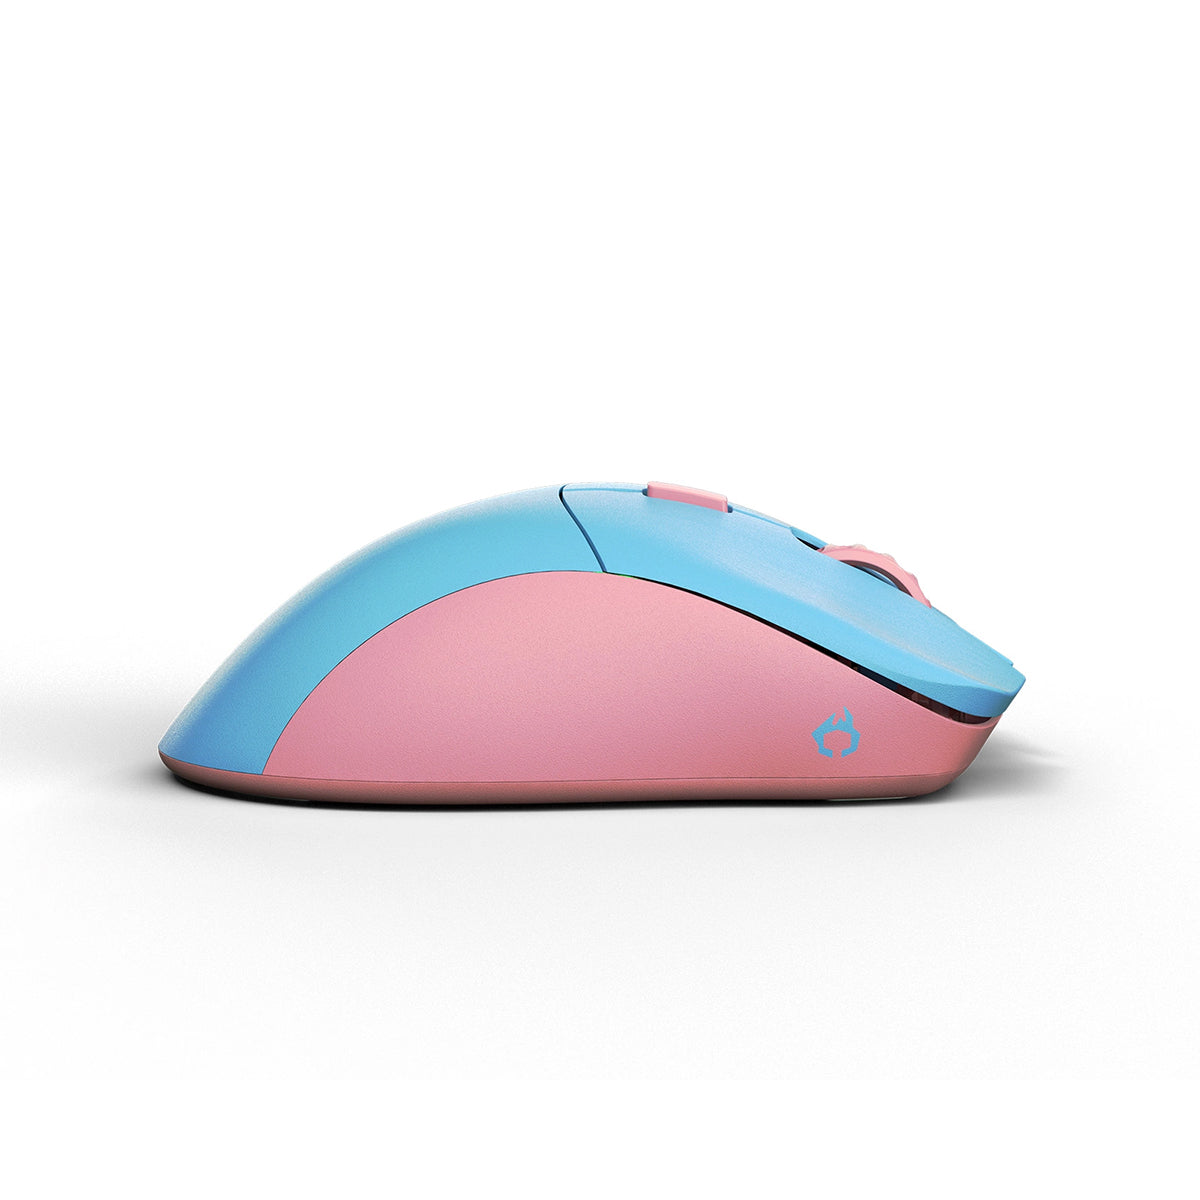 Glorious Forge Model D Pro Wireless Gaming Mouse - Skyline – Ghostly ...